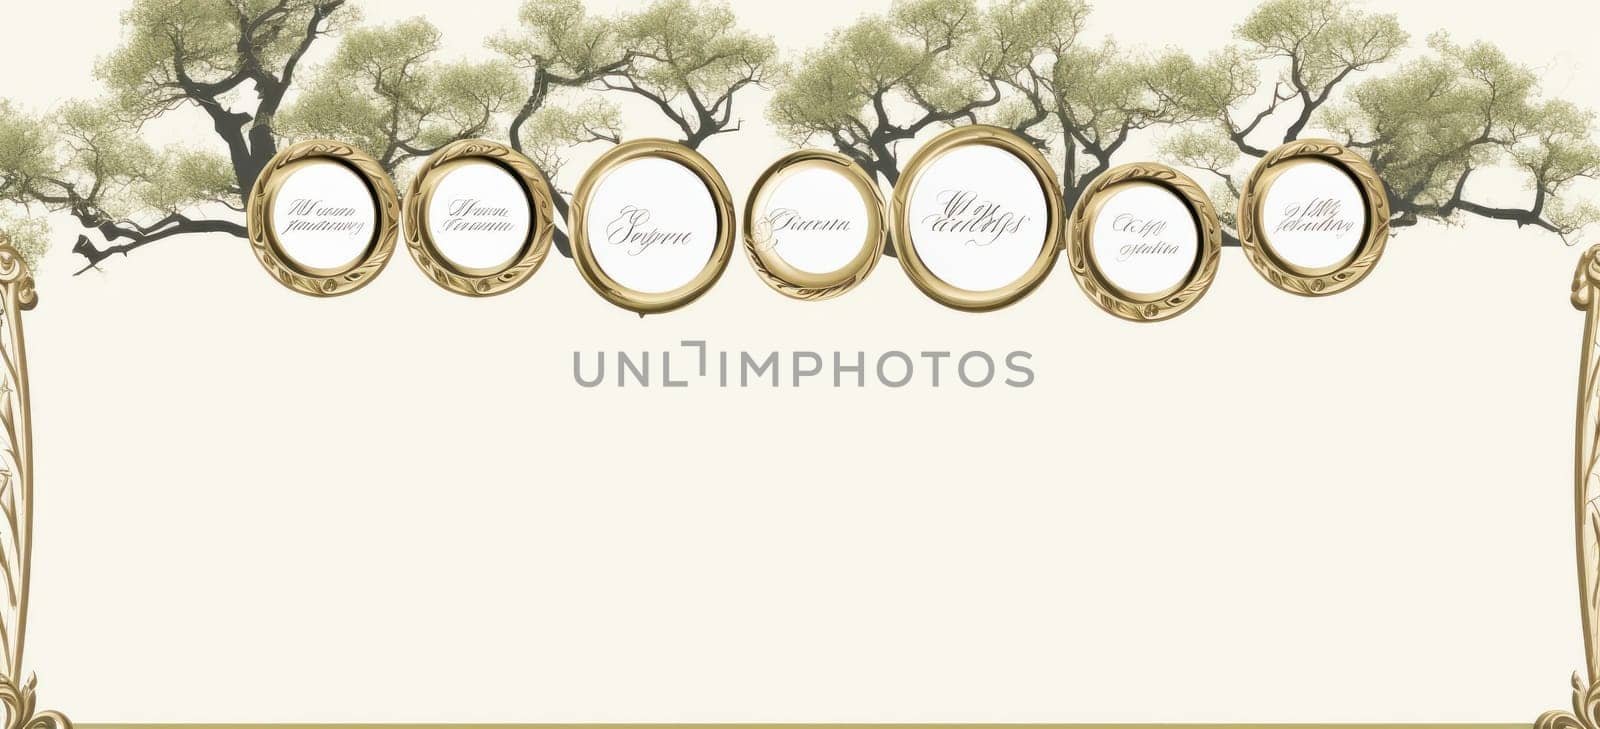 Personalized family tree postcard design by Yurich32